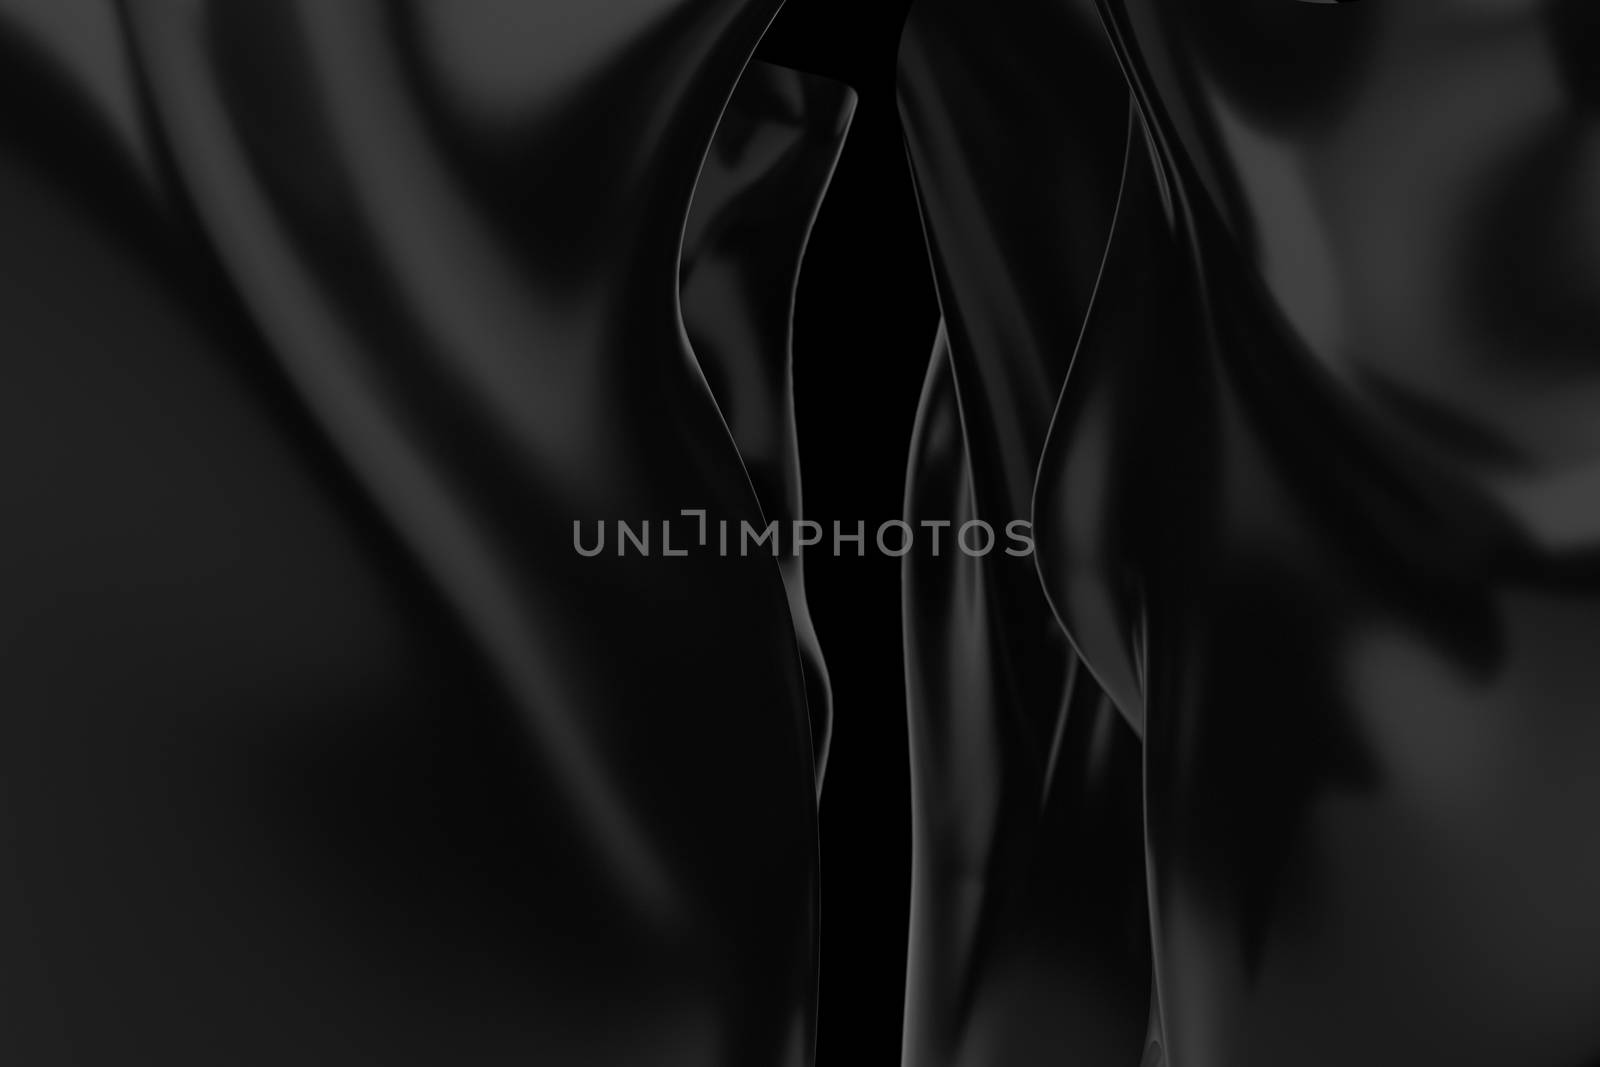 Black abstract  dramatic cloth background 3d rendering